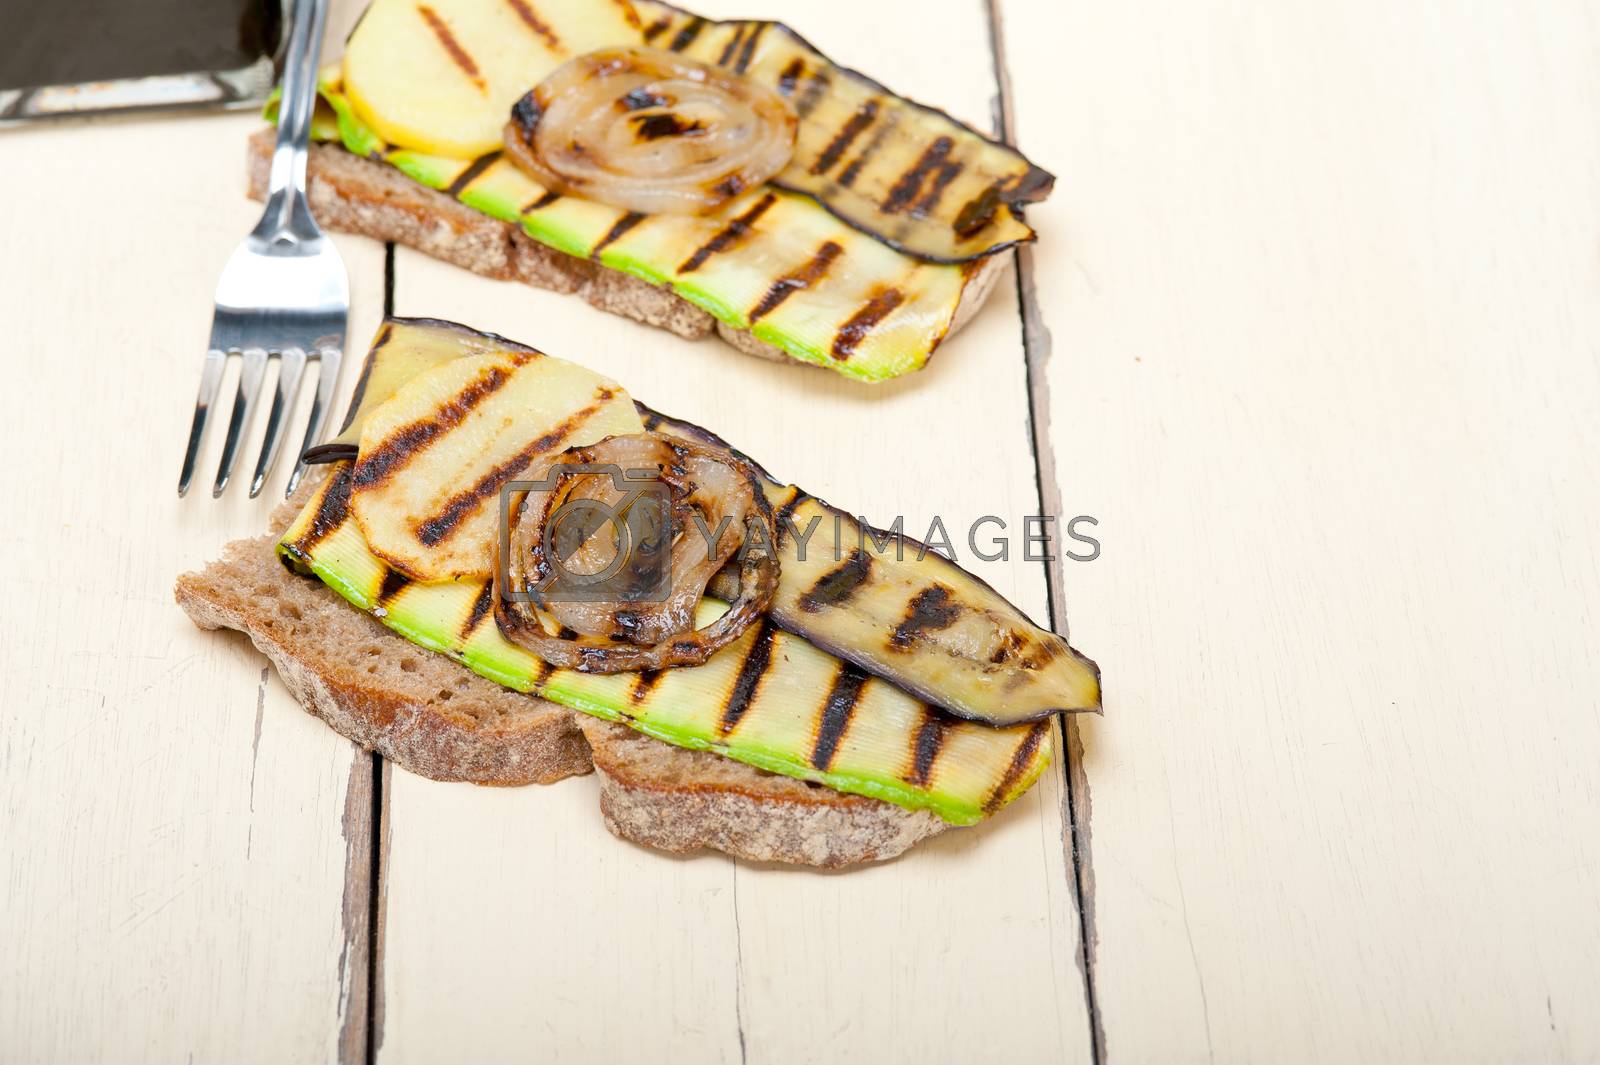 Royalty free image of grilled vegetables on bread by keko64